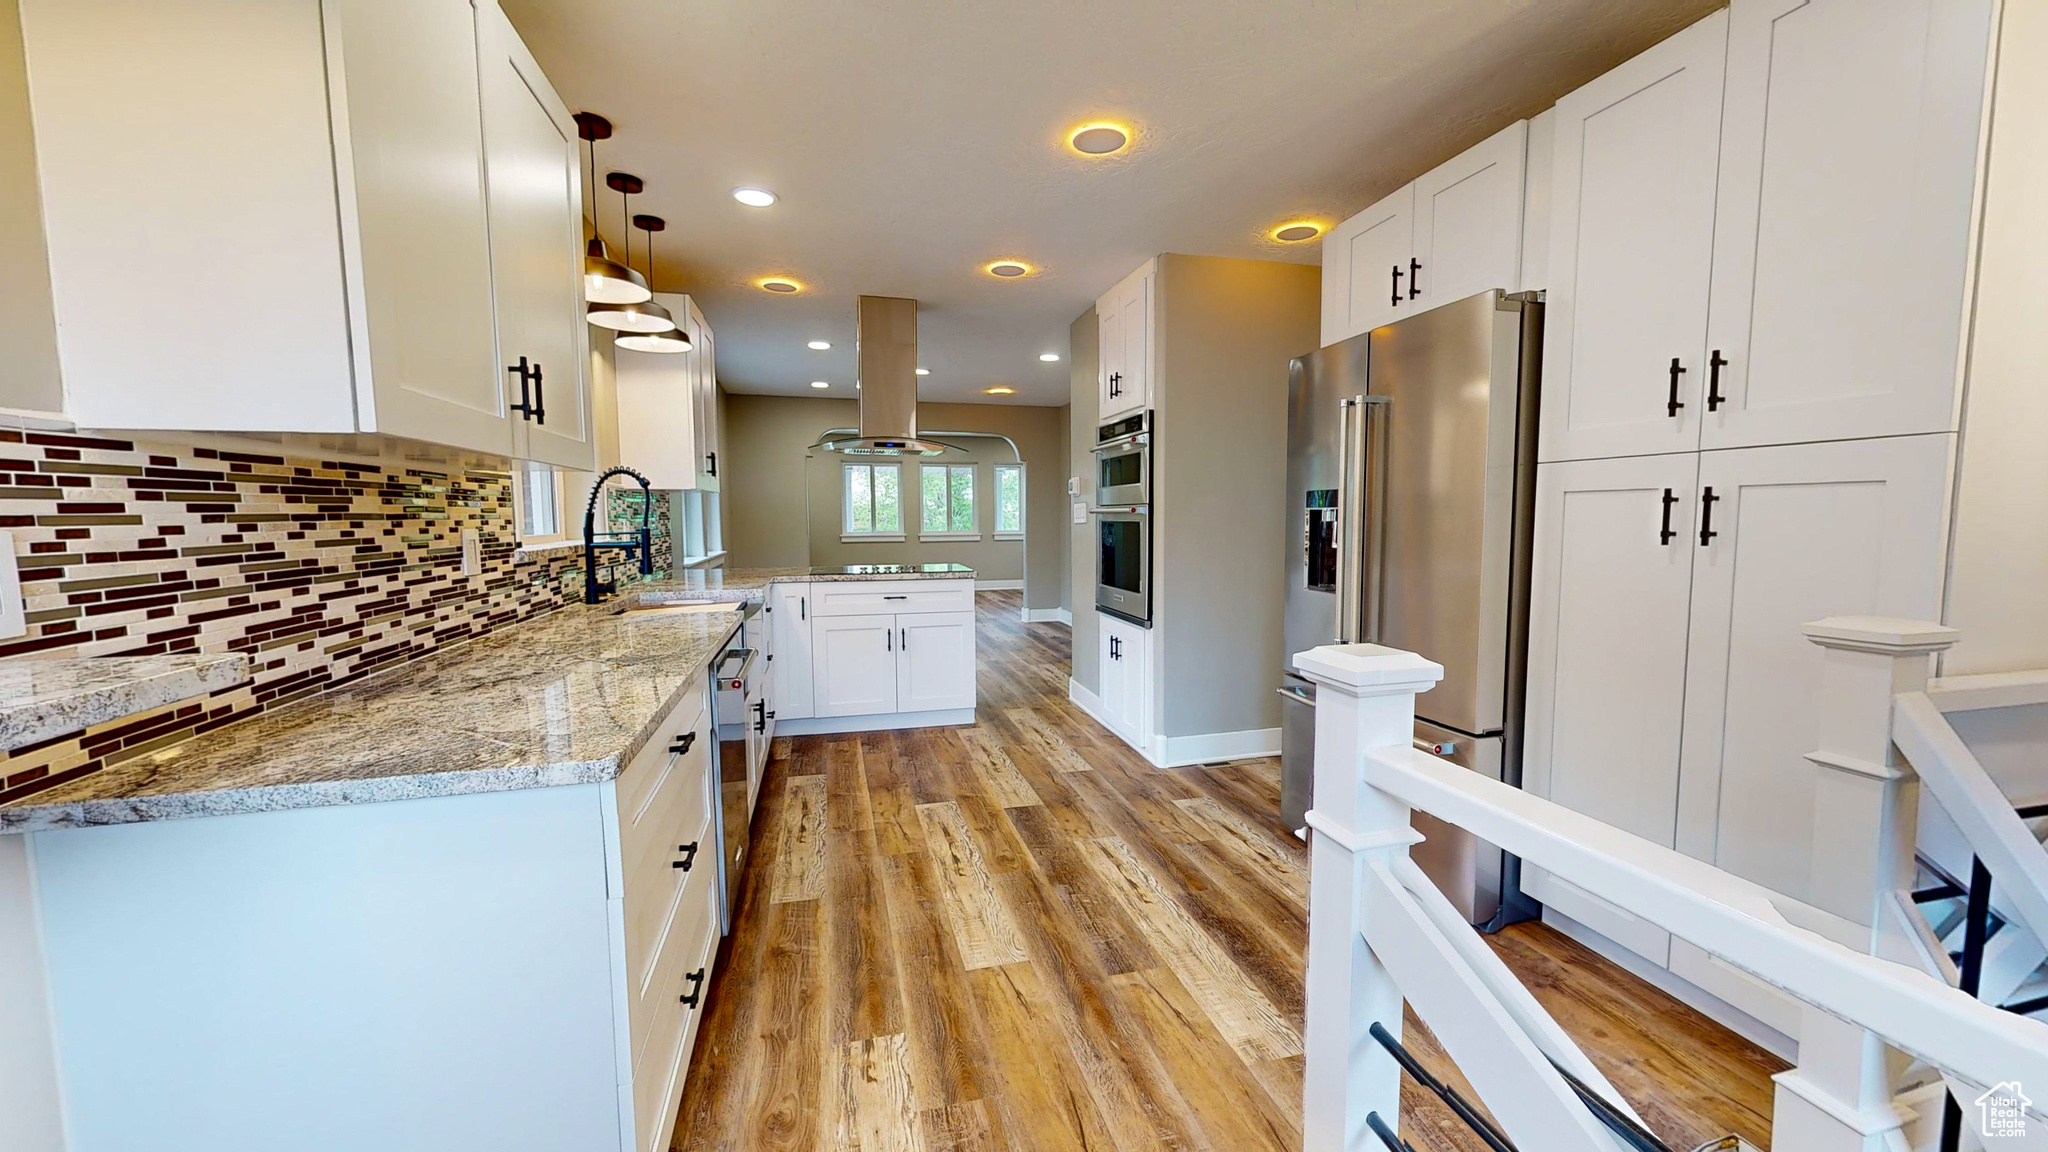 Kitchen with light wood-type flooring, hanging light fixtures, island exhaust hood, and white cabinetry